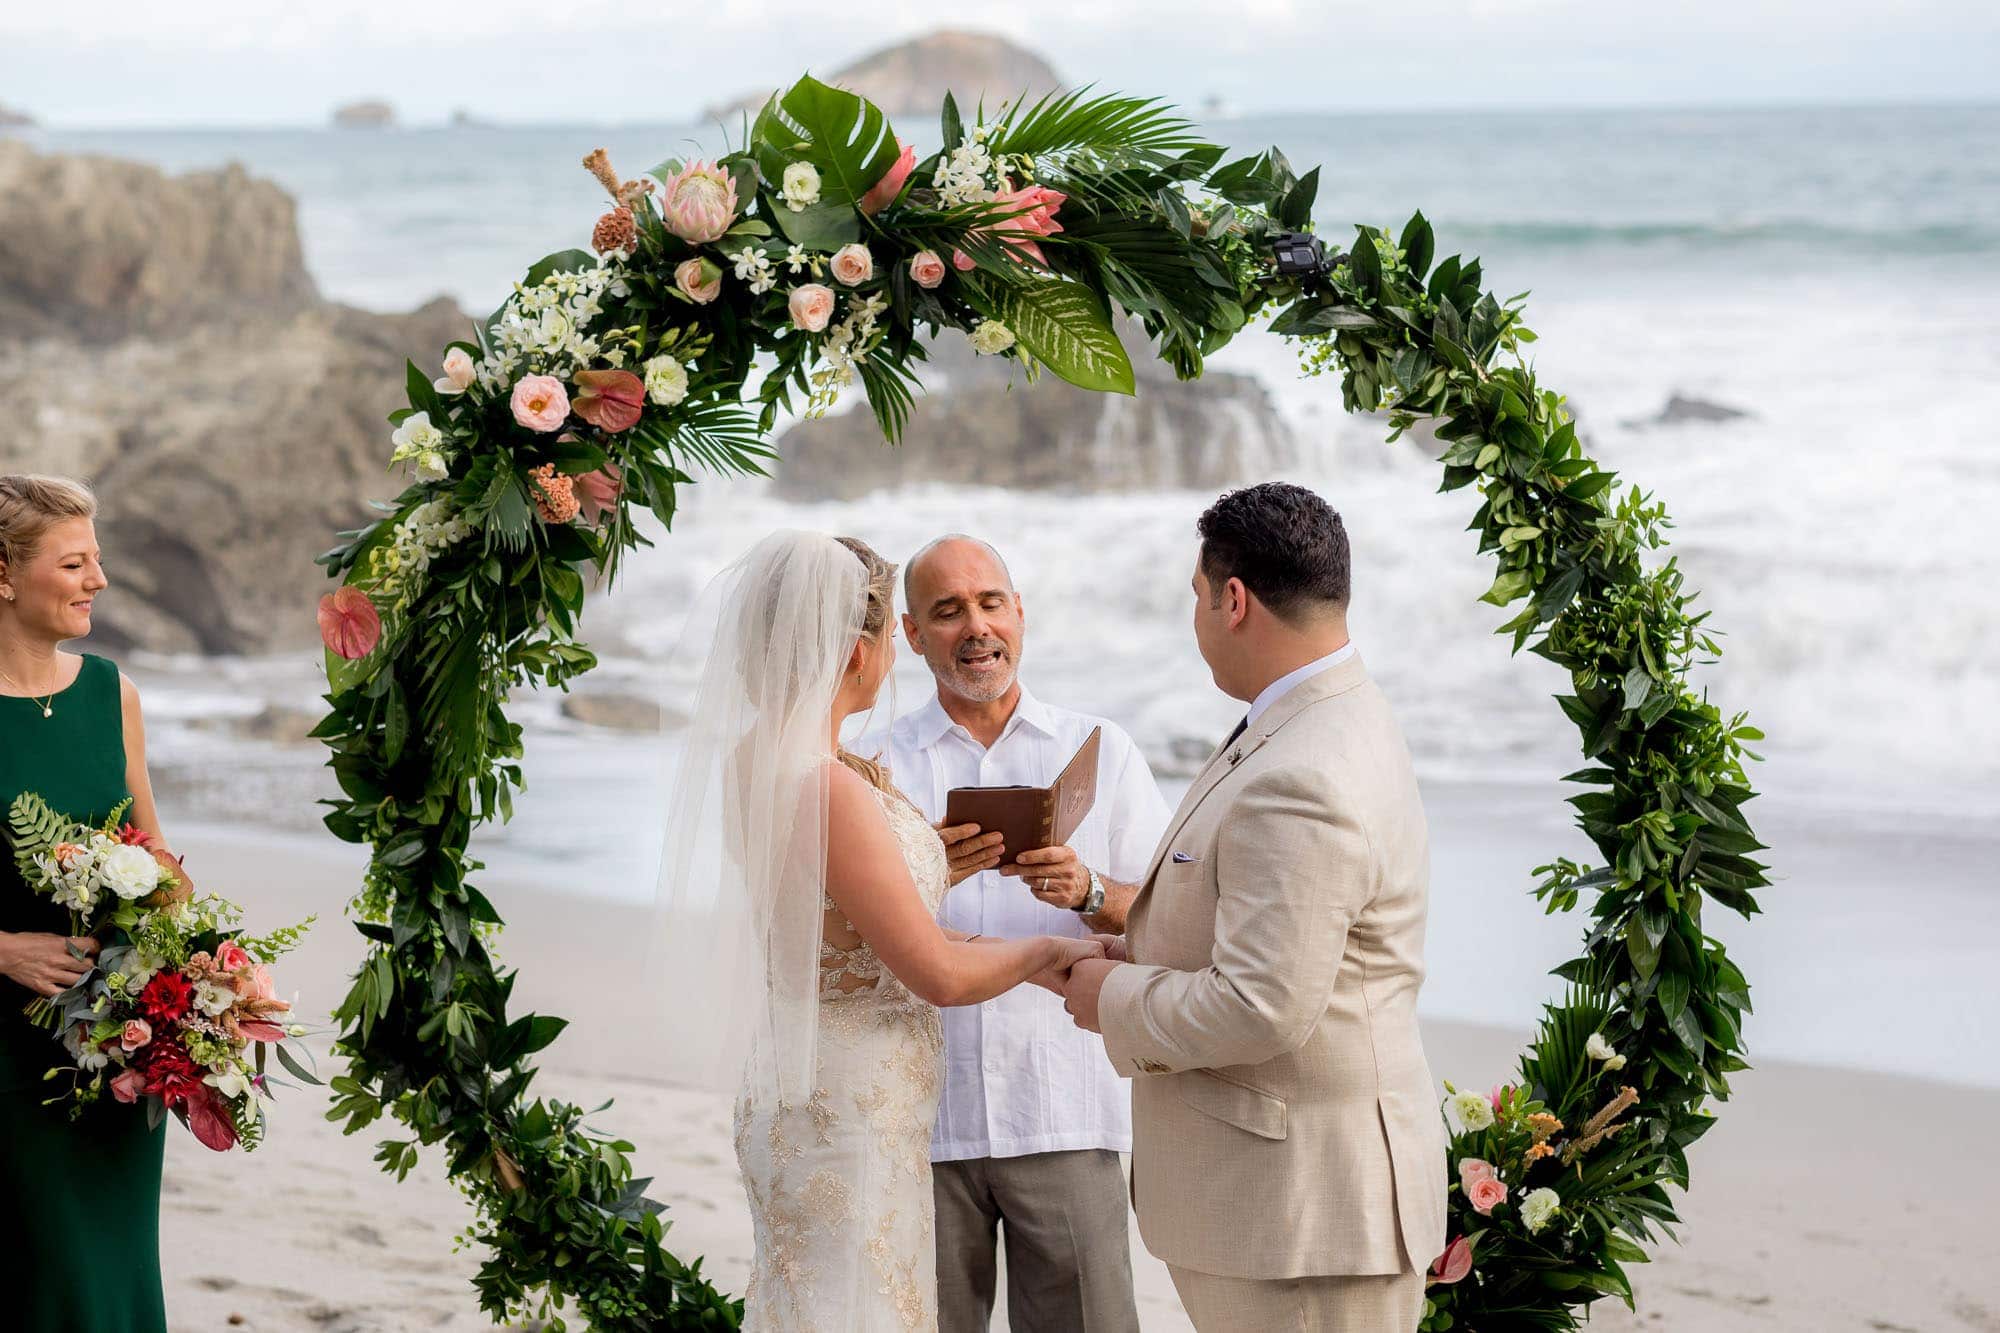 Getting married arenas del mar